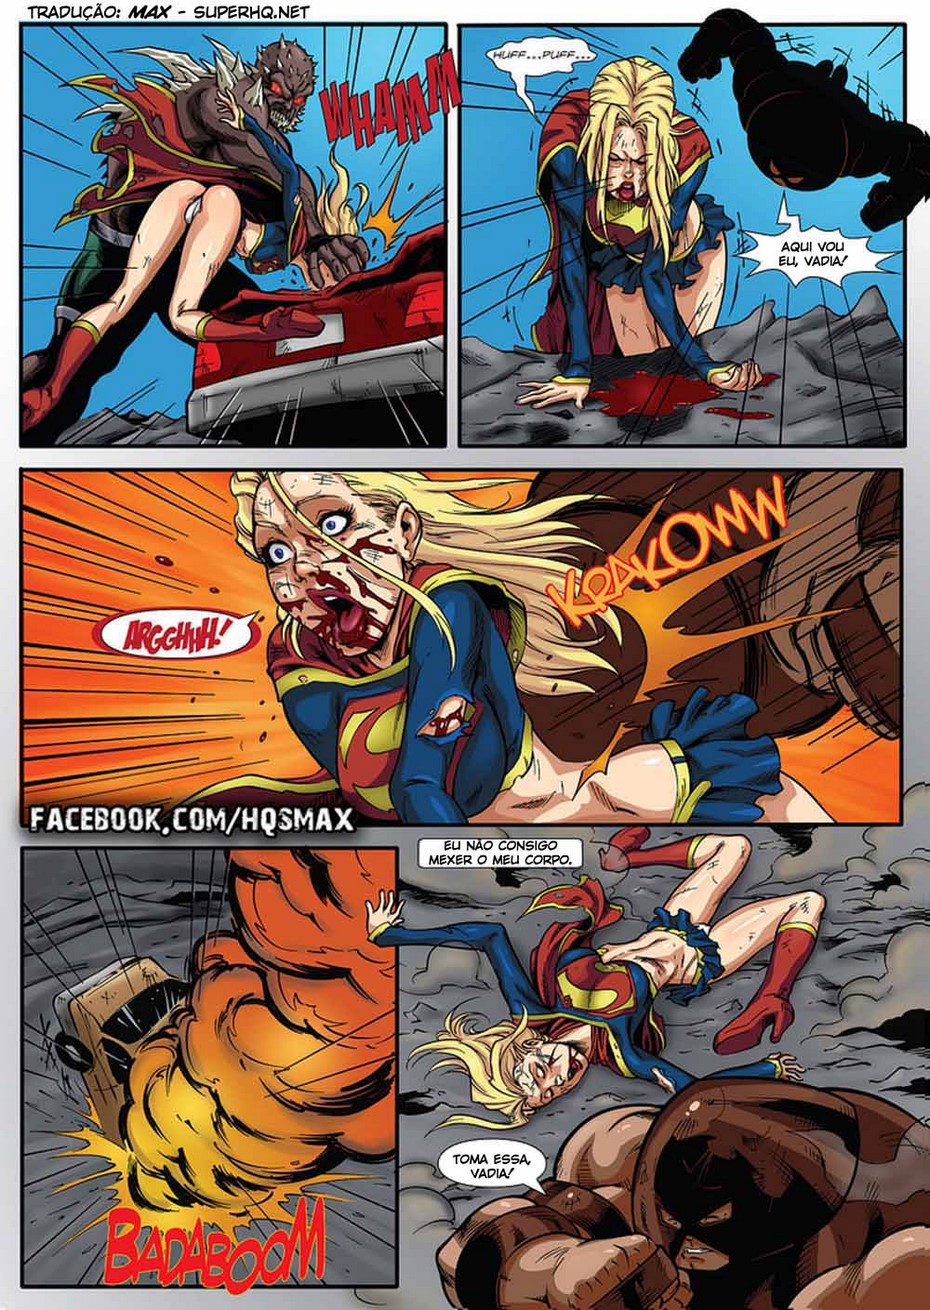 SuperGirl’s Last Stand - 15